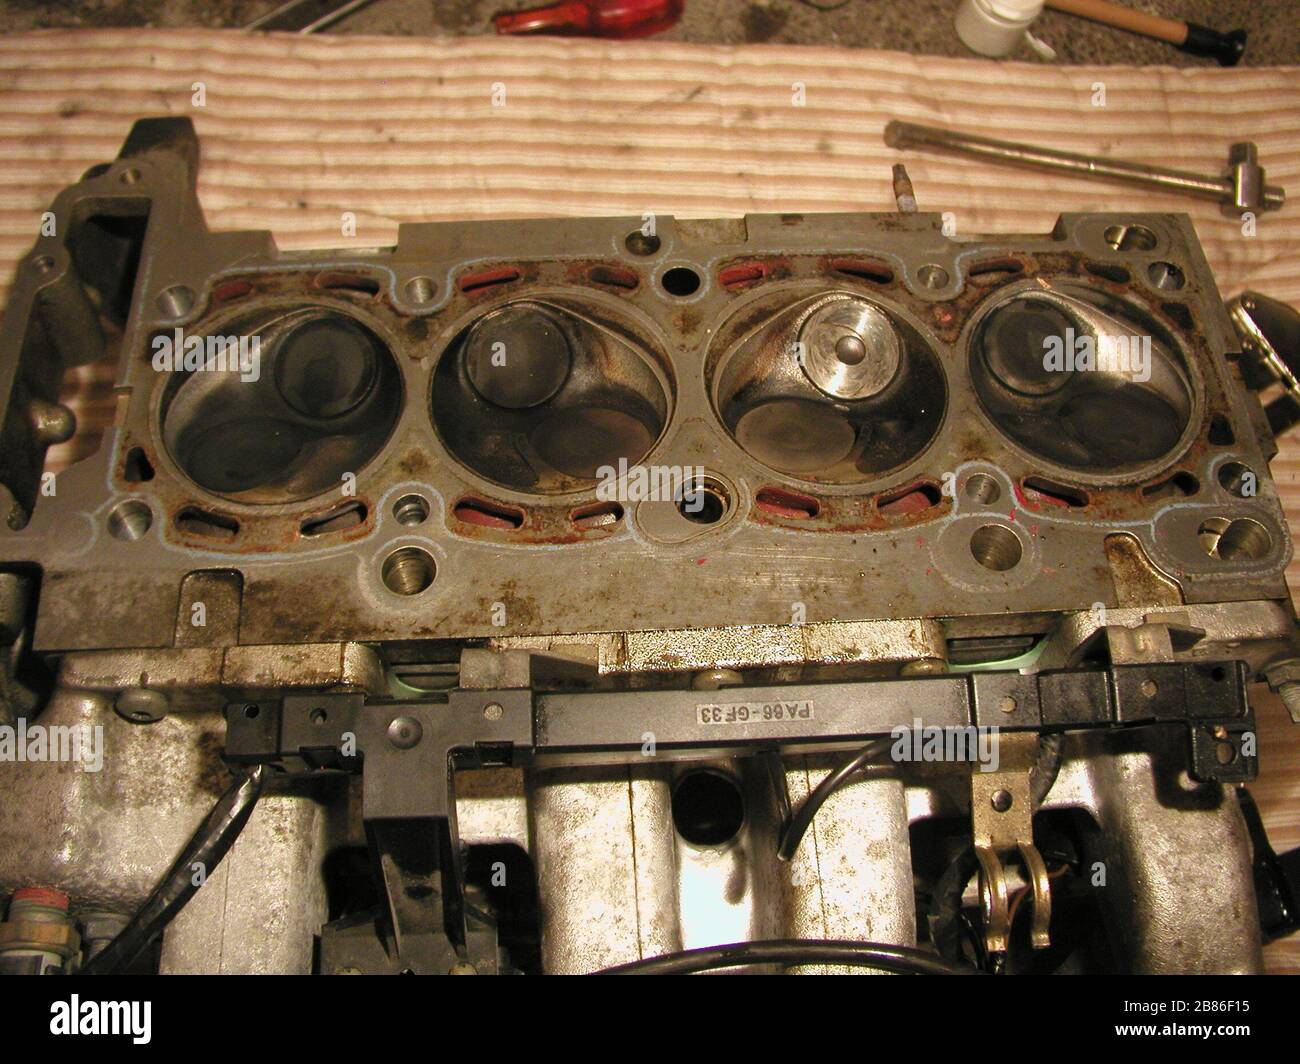 'The cylinder head of the en:Ford I4 DOHC engine, seen from its bottom side. The intake manifold has been left on and is visible on the bottom side of the image, while the exhaust manifold has been removed to replace an exhaust valve, as seen by the much shinier valve in the second combustion chamber from the right.; 18 September 2006 (original upload date); Transferred from en.wikipedia to Commons.; Dolda2000 at English Wikipedia; ' Stock Photo